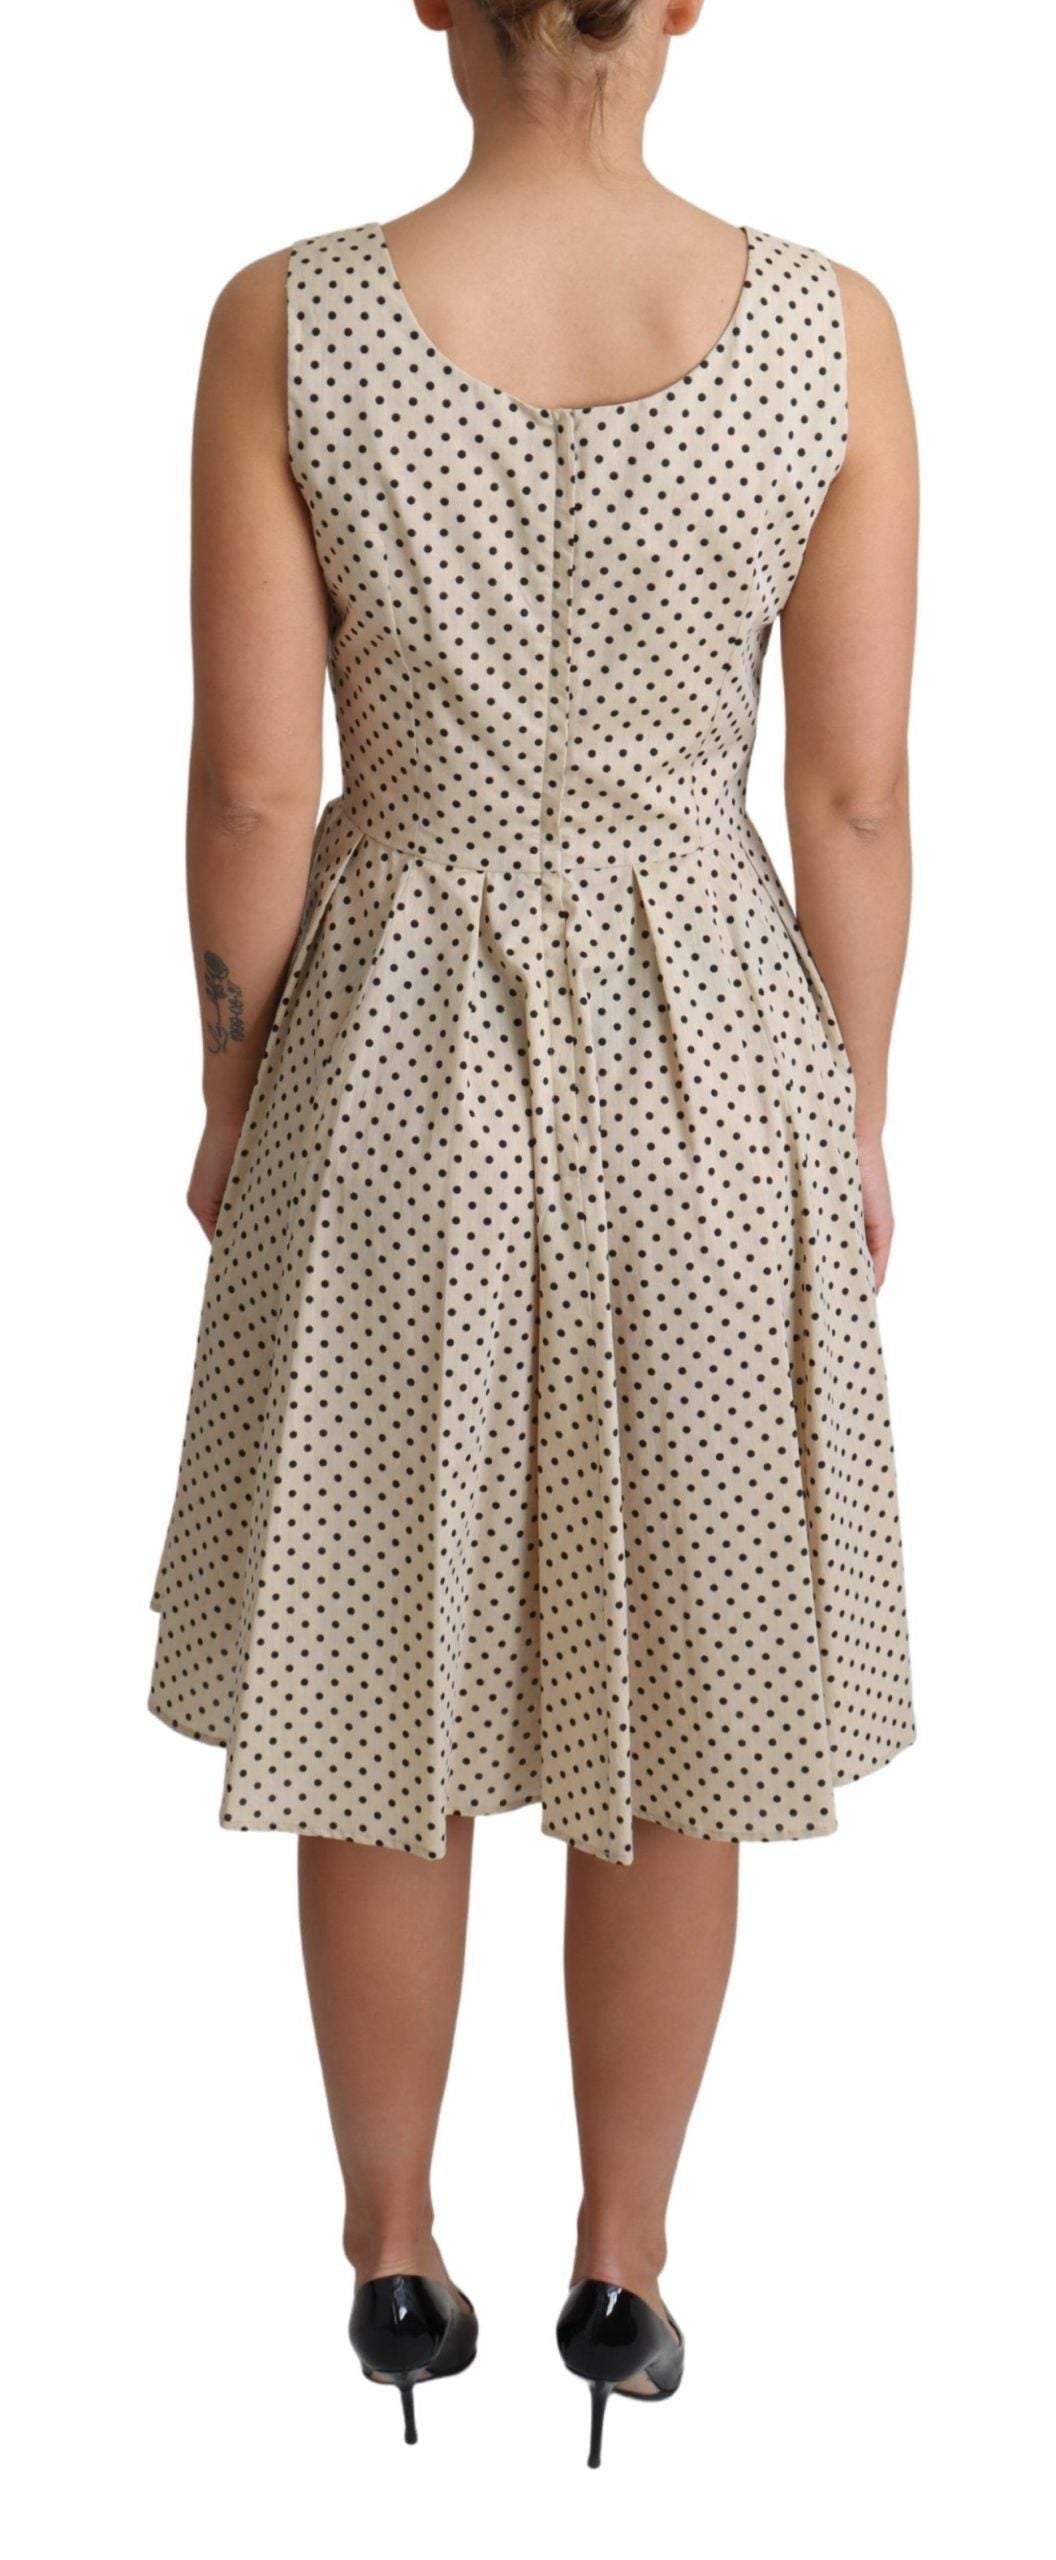 Dolce & Gabbana Beige Polka Dotted Cotton A-Line Dress #women, Beige, Dolce & Gabbana, Dresses - Women - Clothing, feed-agegroup-adult, feed-color-Beige, feed-gender-female, IT38|XS, IT40|S, IT42|M, IT44|L, IT46|XL, Women - New Arrivals at SEYMAYKA